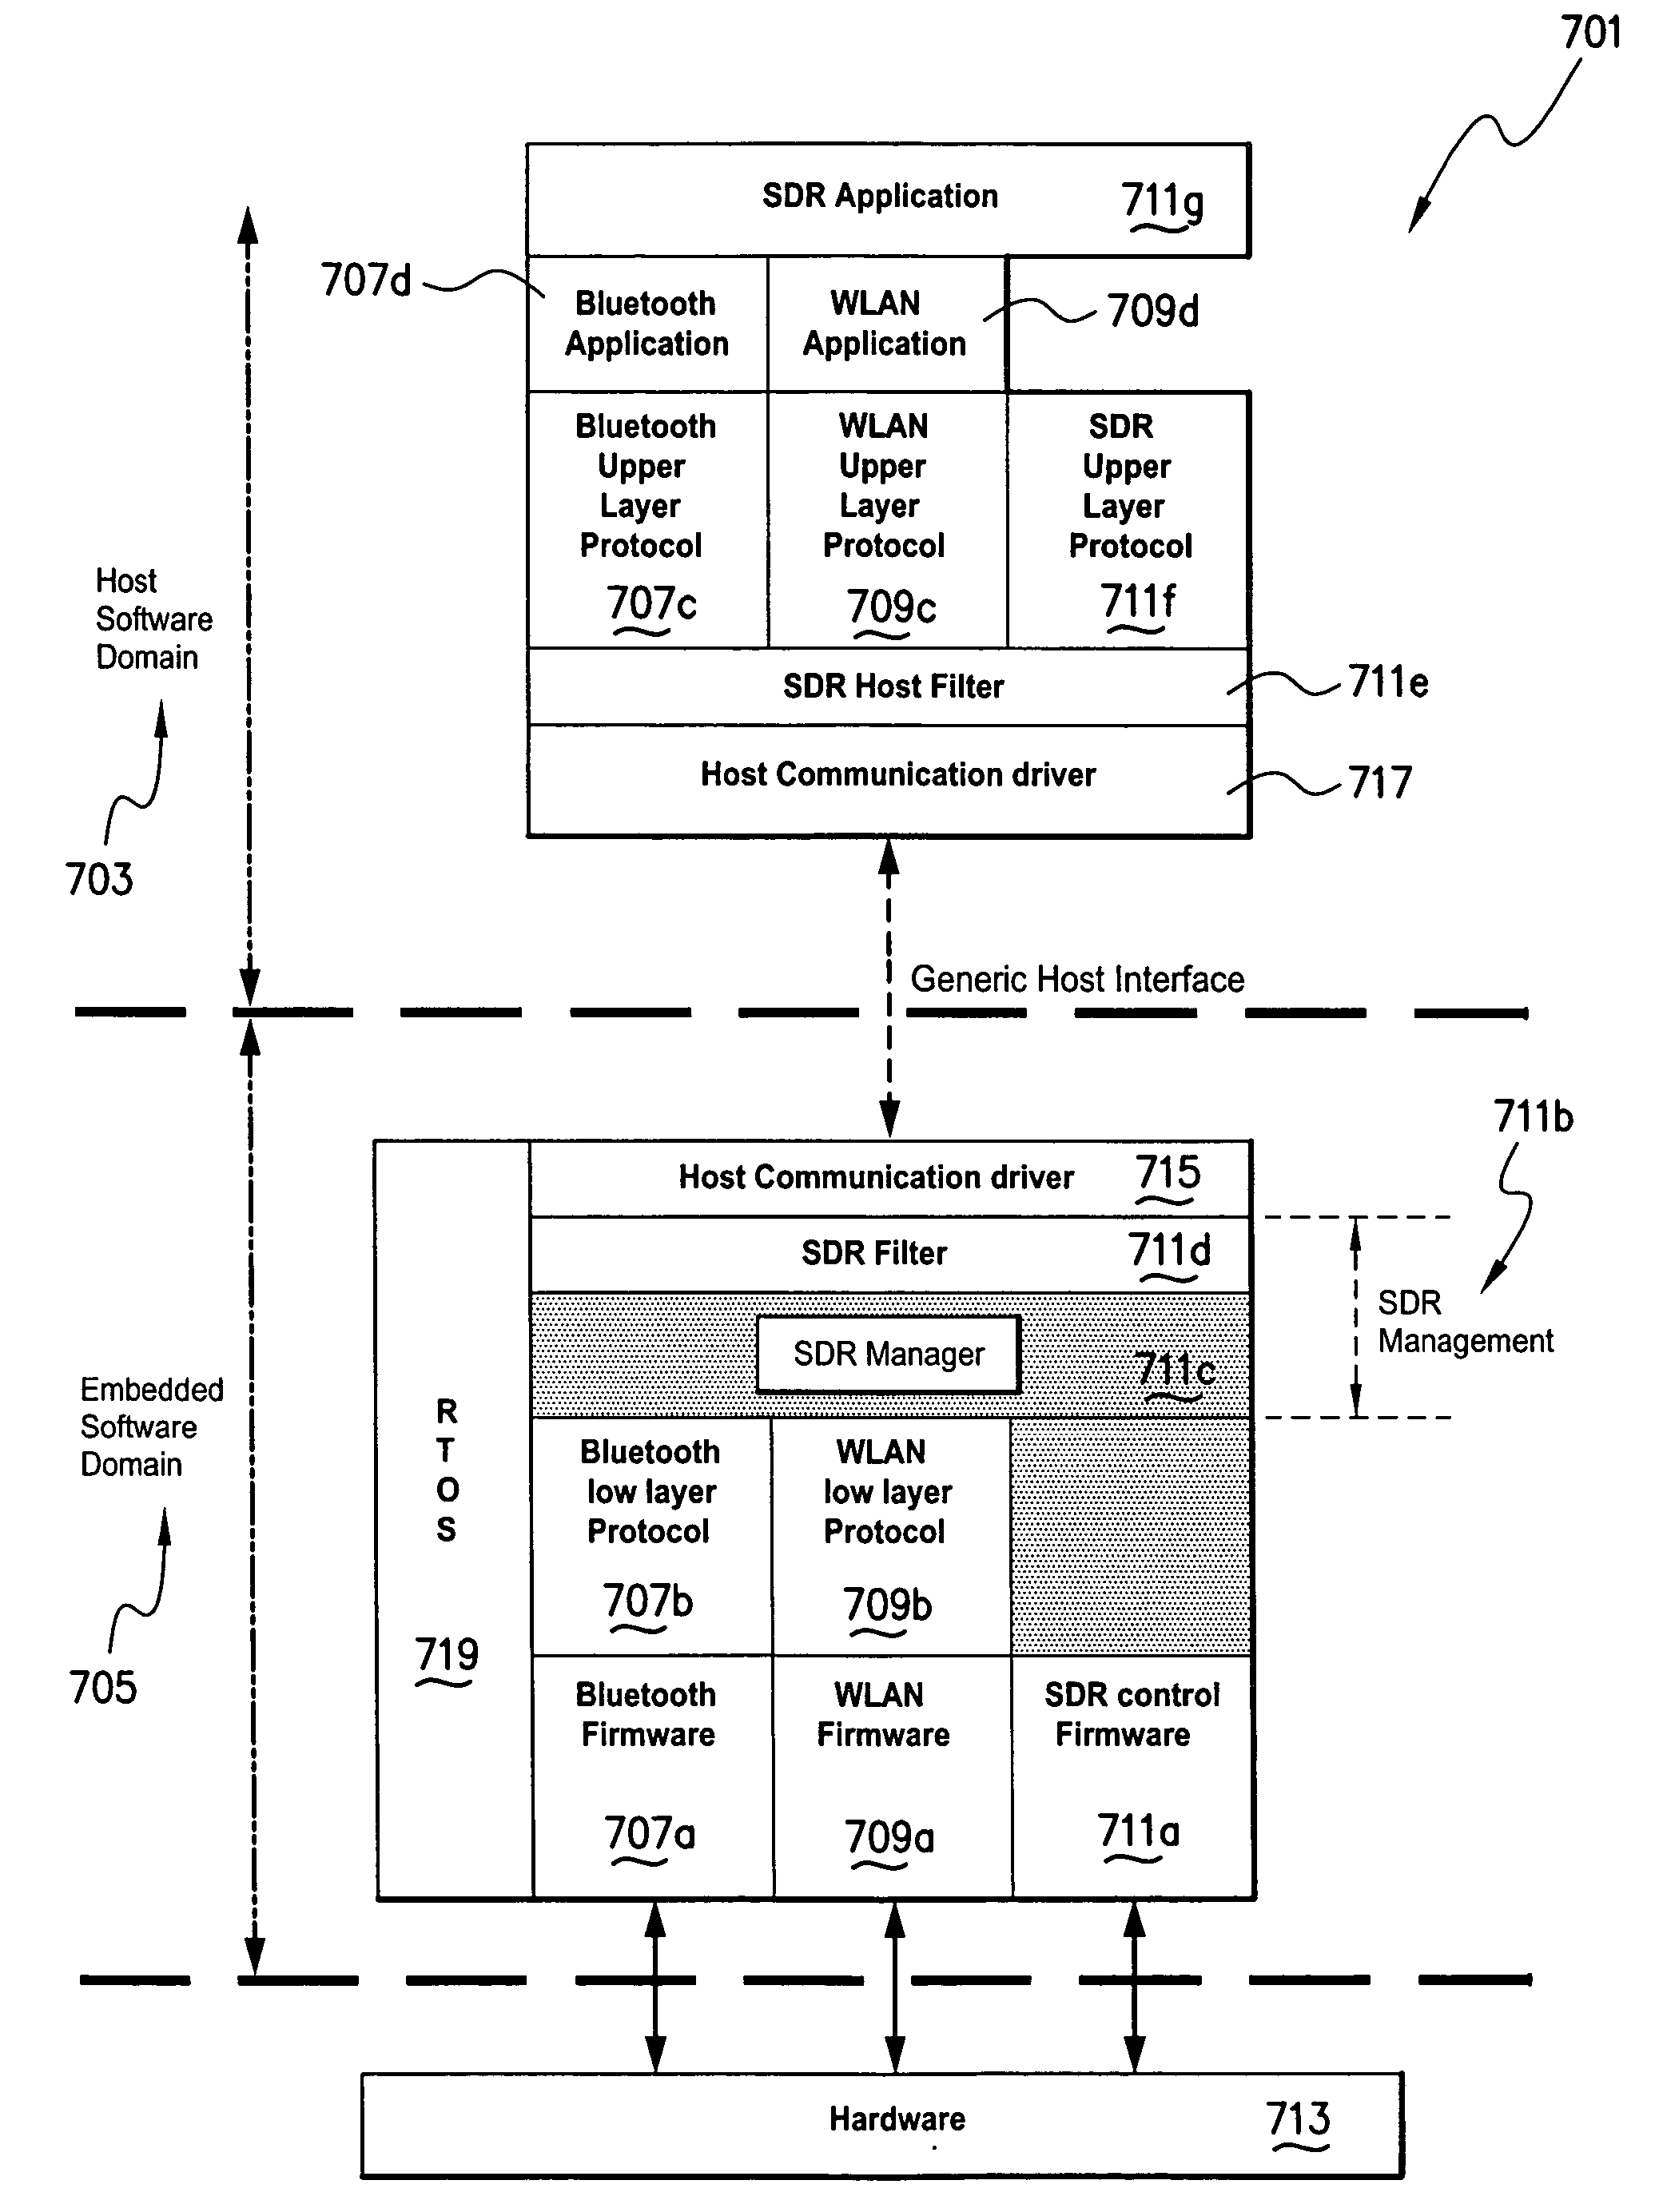 Architecture and protocol for software defined radio system